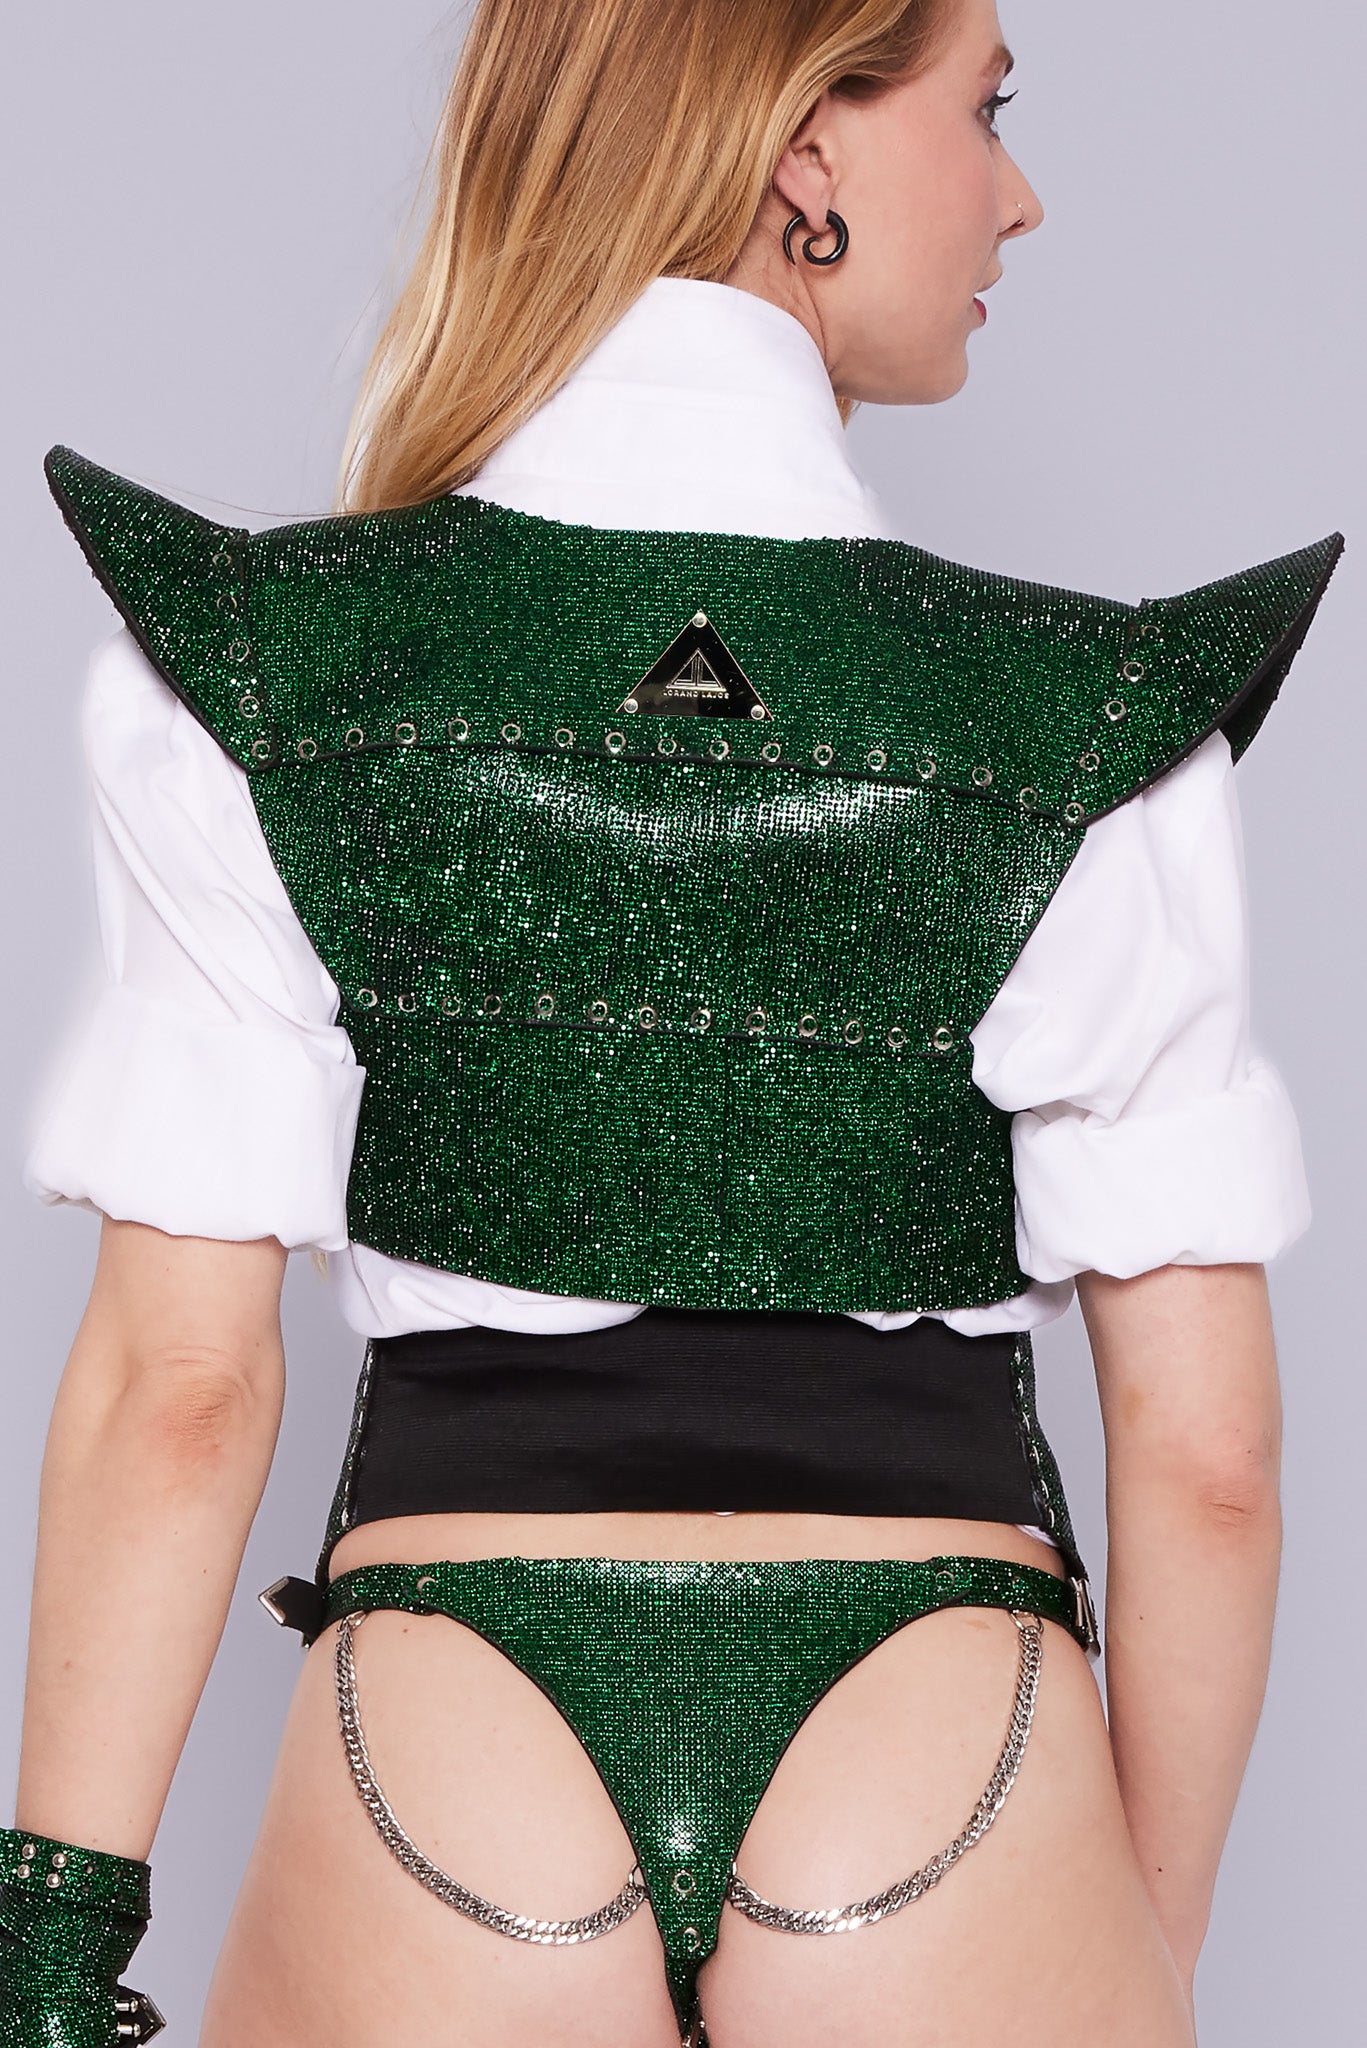 Chic short jacket with a modern twist, made from luxurious emerald green crystal fabric